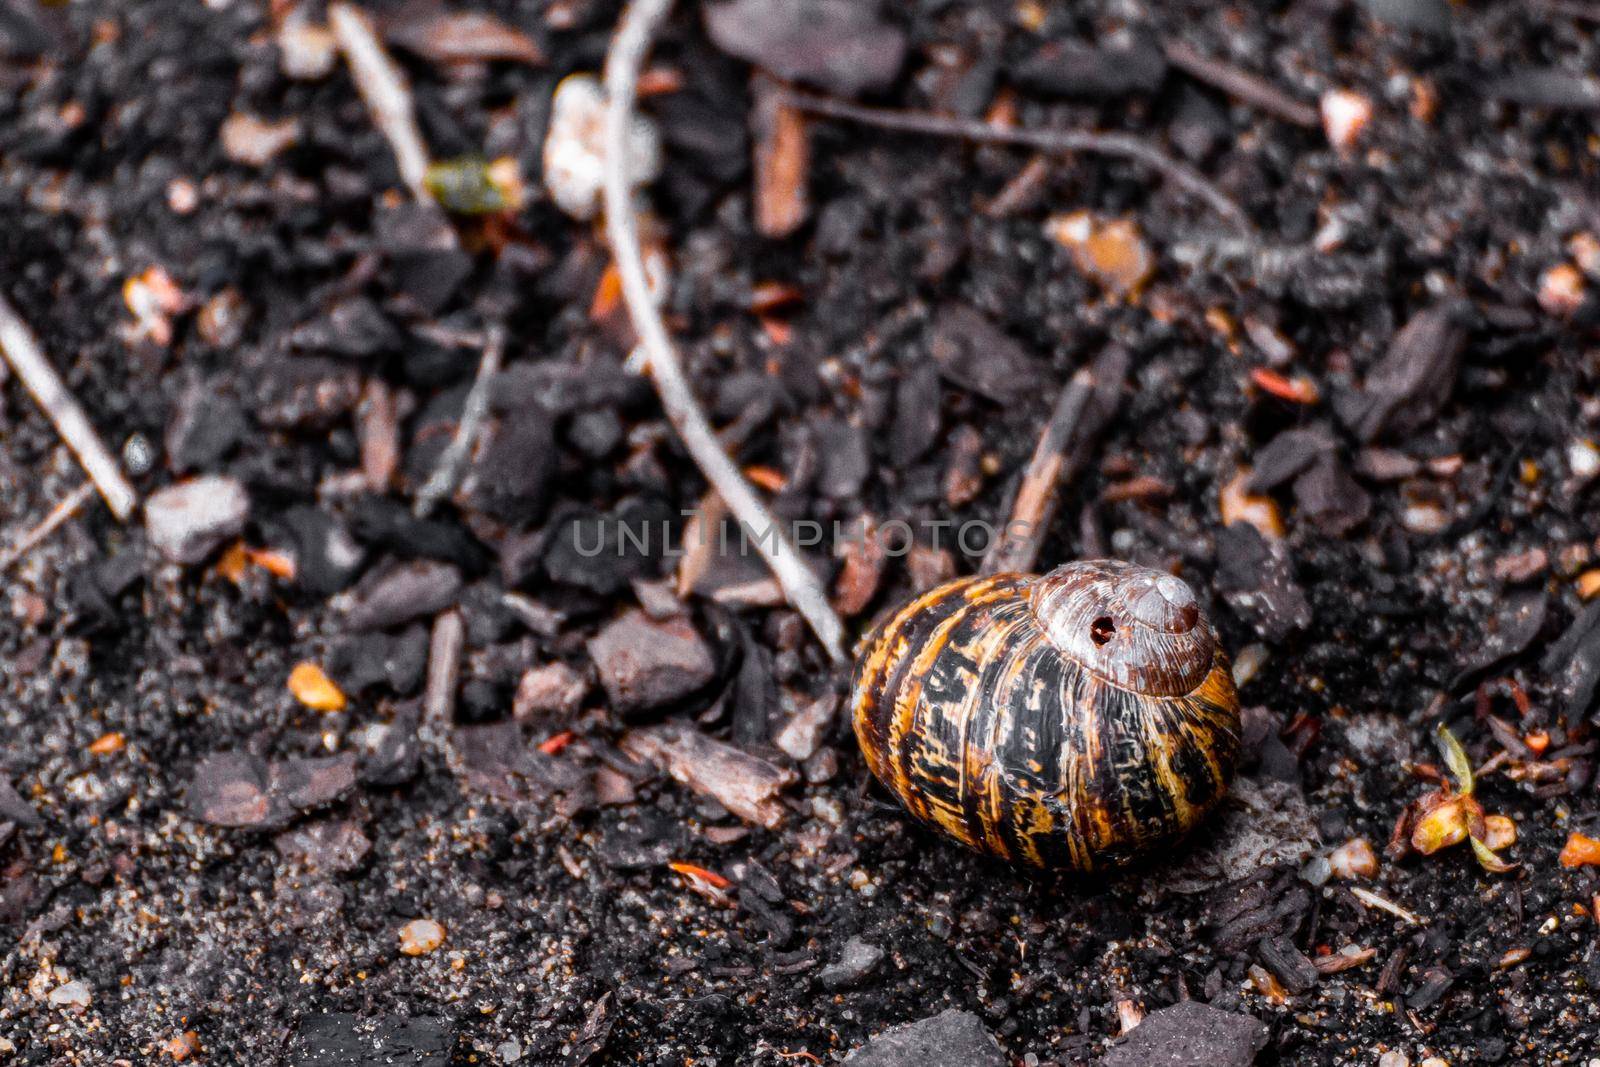 A Snail Shell Lying On The Ground by AlbertoPascual